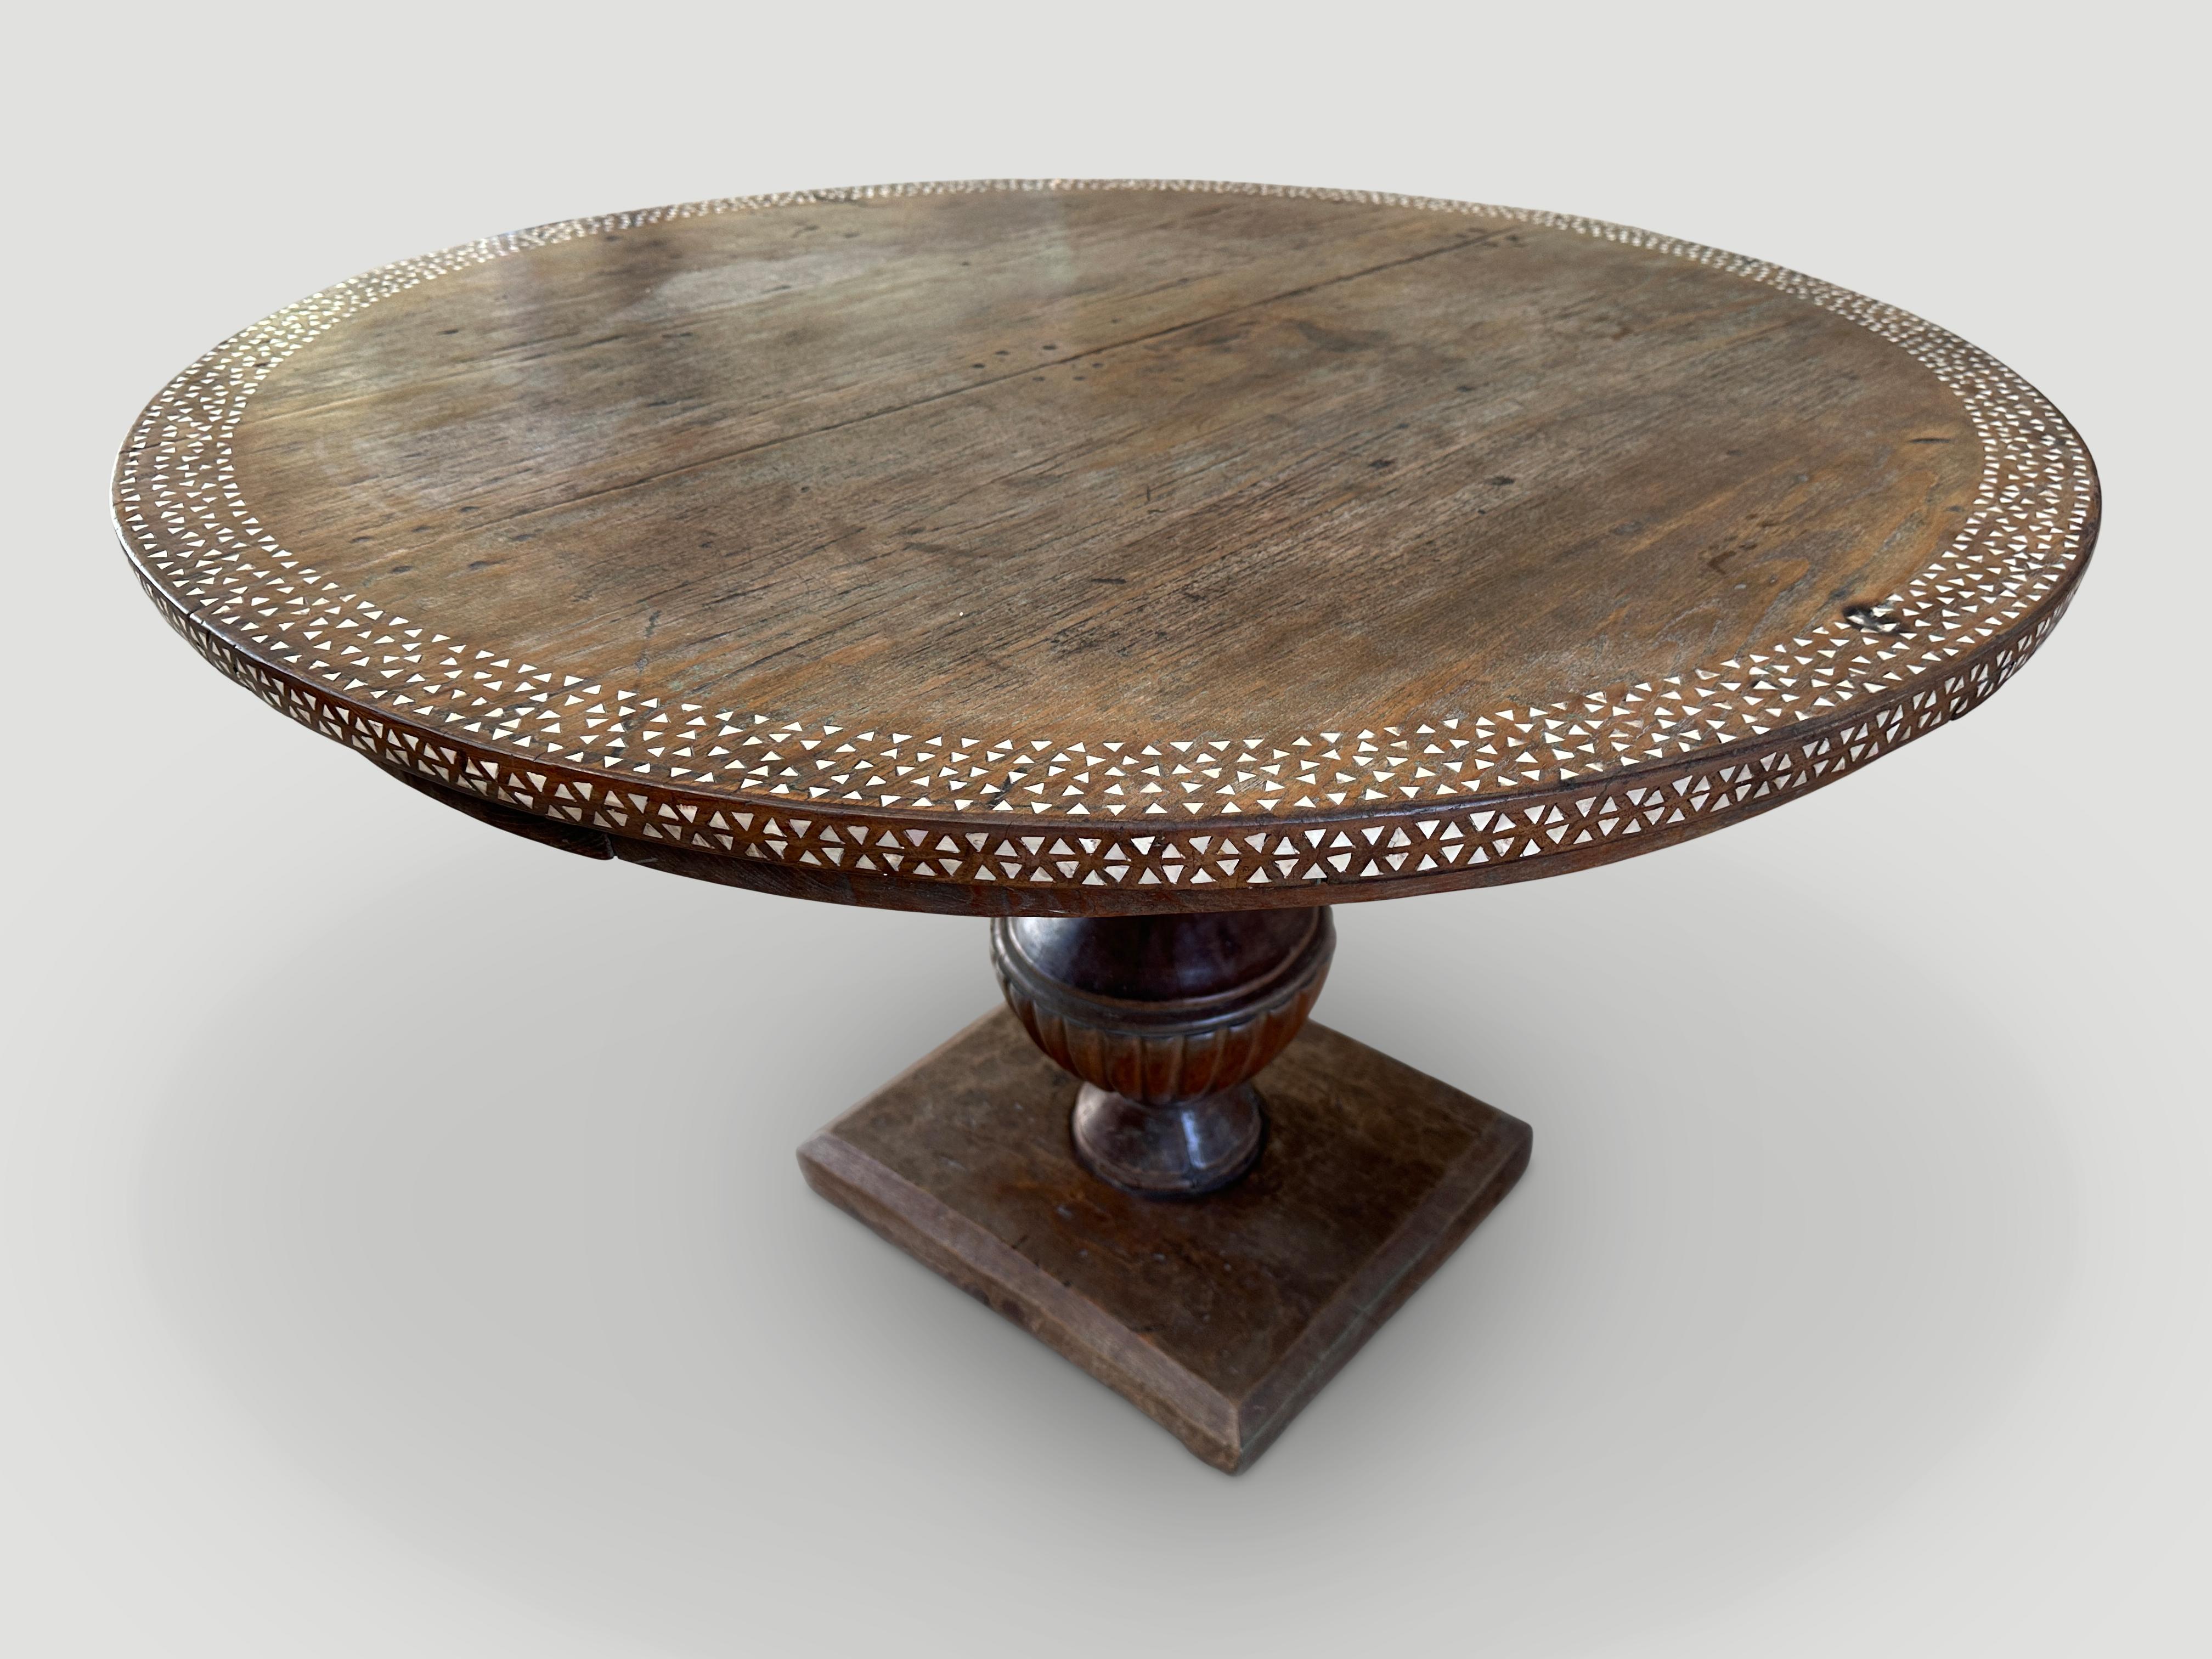 Impressive antique colonial teak wood round dining table or entry table. circa 1940. Beautiful hand carved base. We added the shell inlay to the top and edge. One of a kind. 

This table was handmade in the spirit of Wabi-Sabi, a Japanese